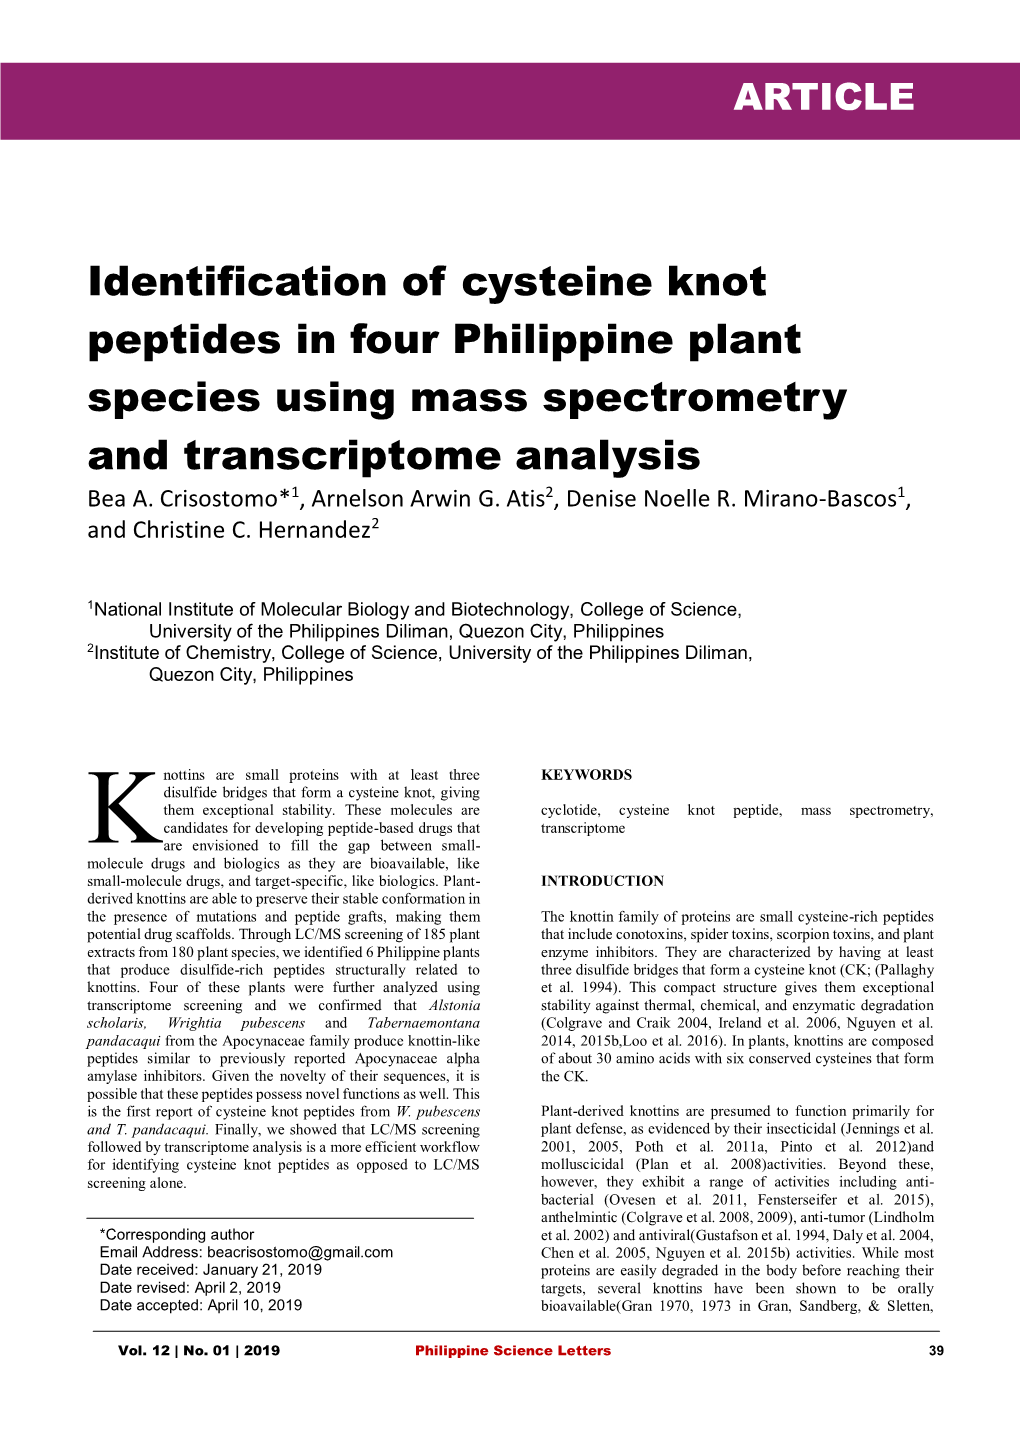 Identification of Cysteine Knot Peptides in Four Philippine Plant Species Using Mass Spectrometry